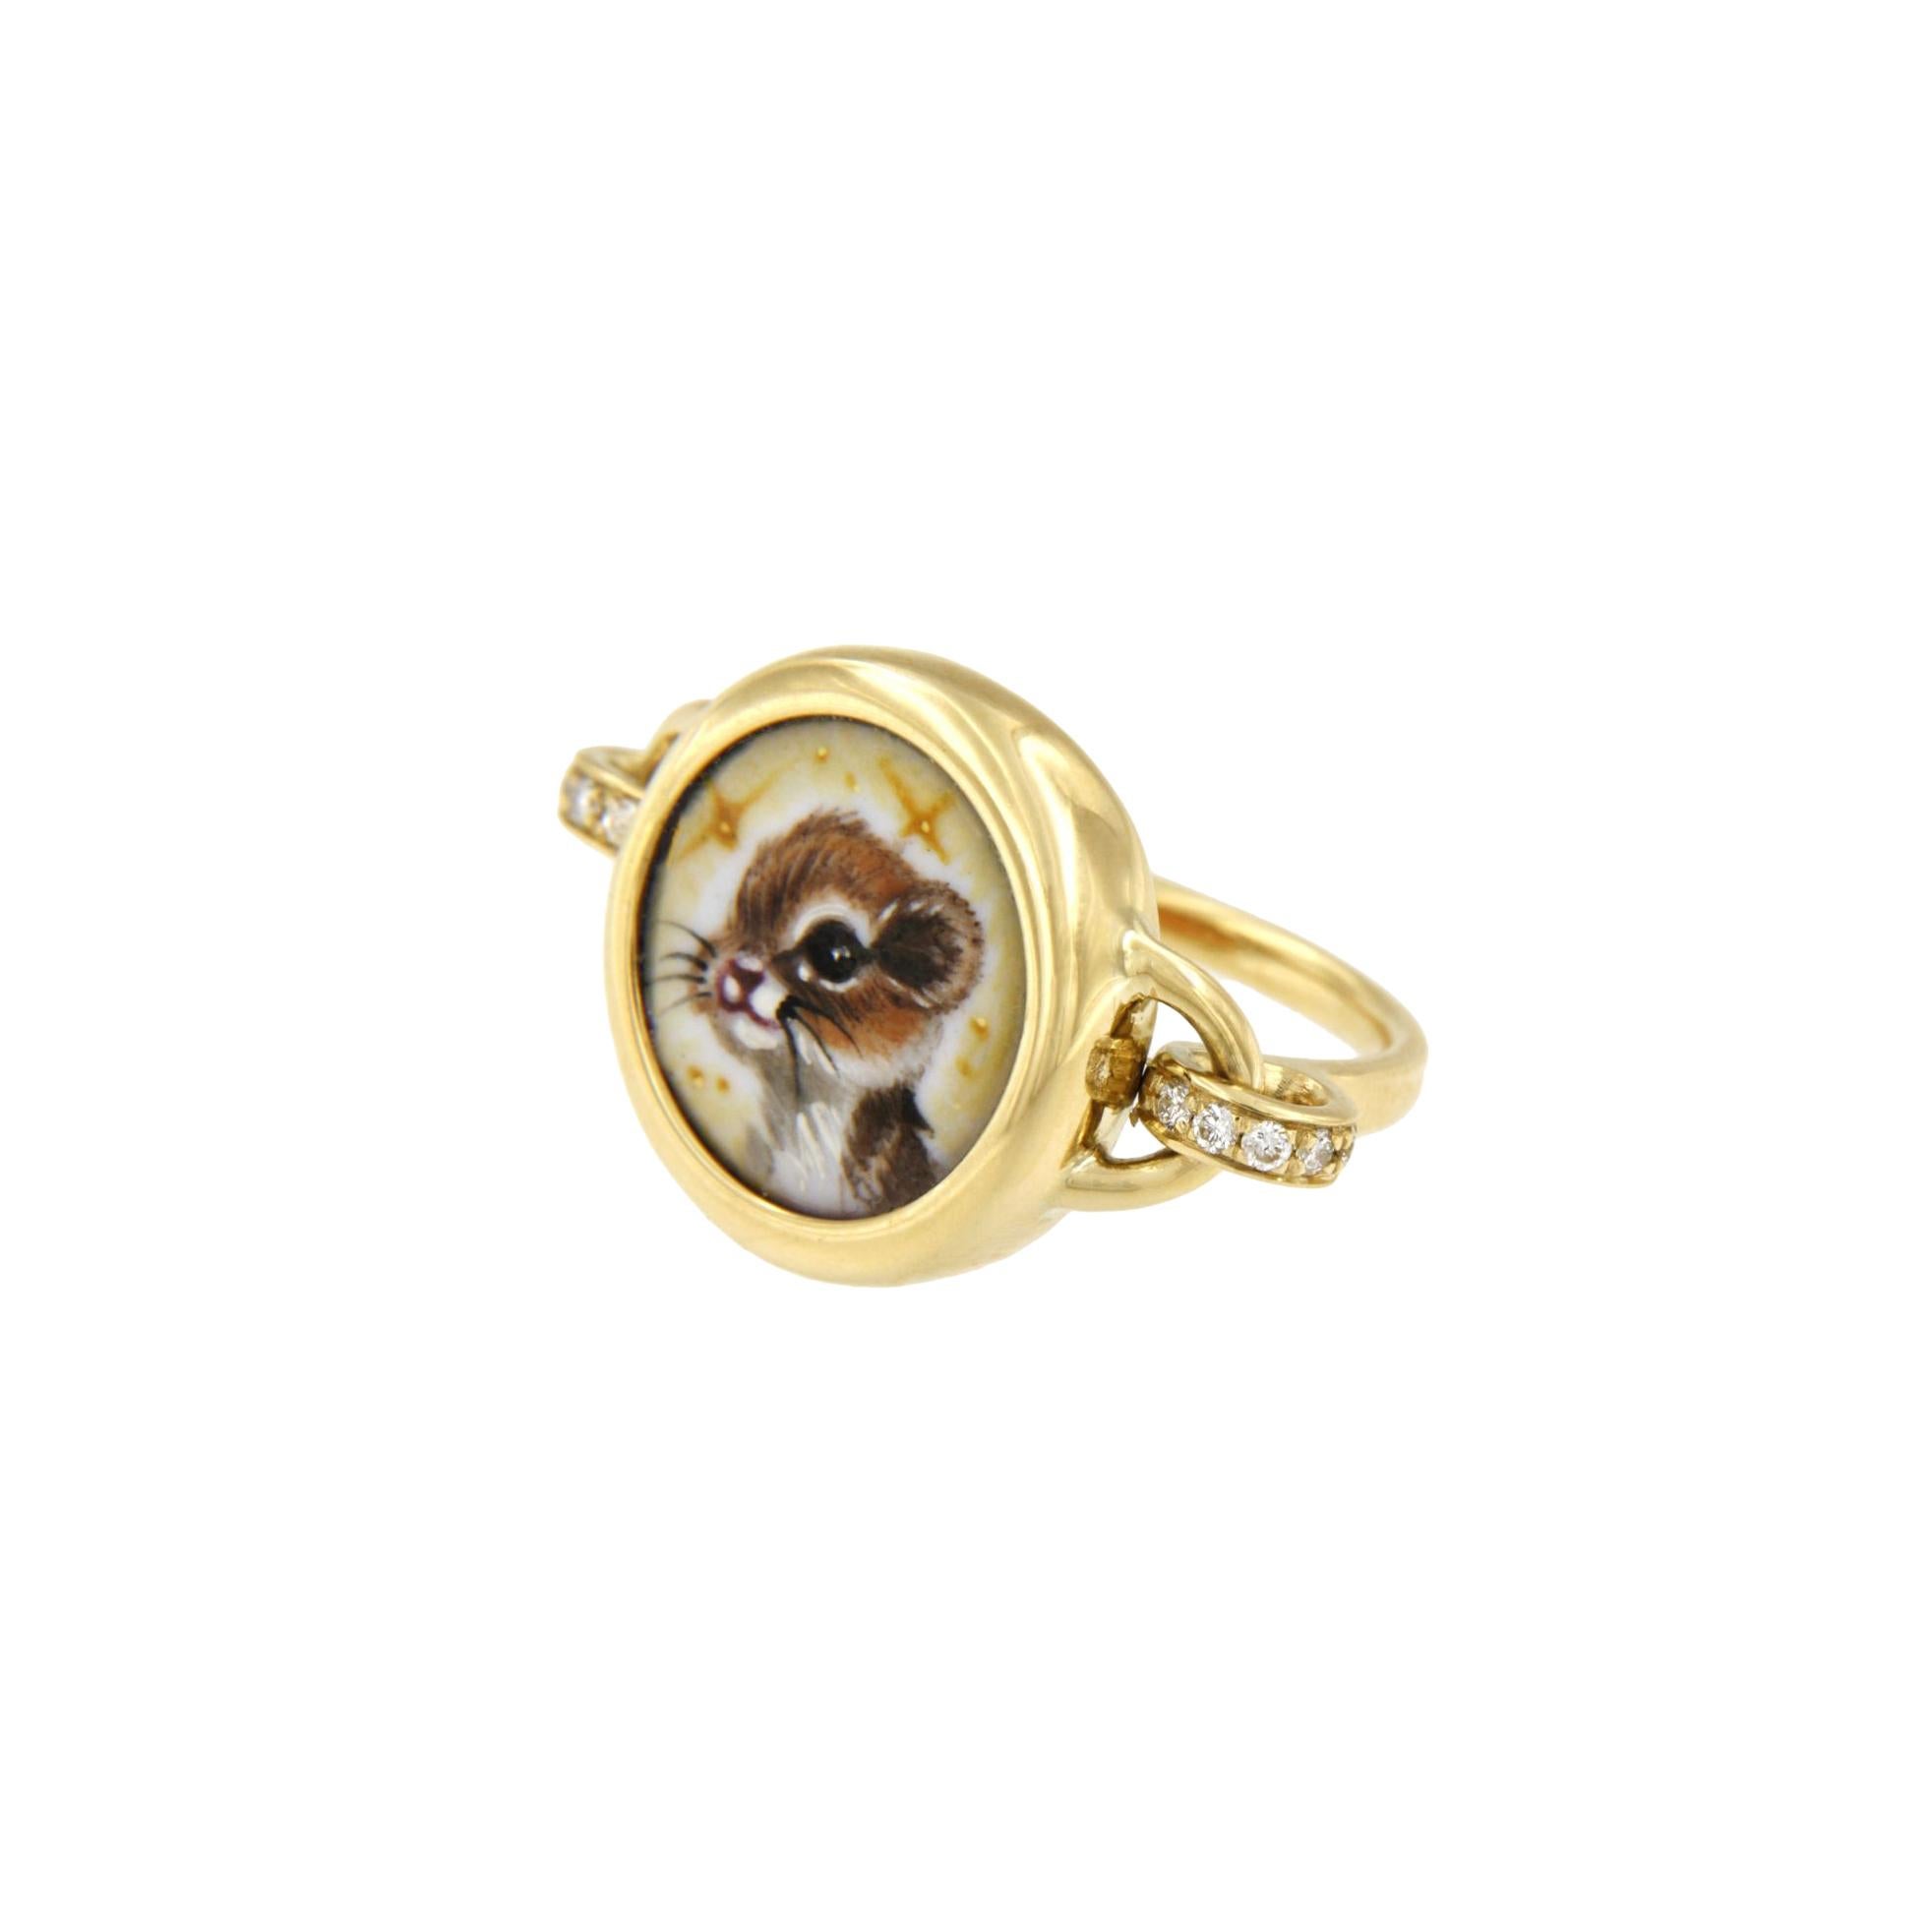 This 18K gold cocktail ring features a Chipmunk that is hand-painted in enamel by our artisan based in Milan, Italy. The ring is embellished with diamonds on each side. This exclusive ring makes for a unique and luxurious gift for the animal lover